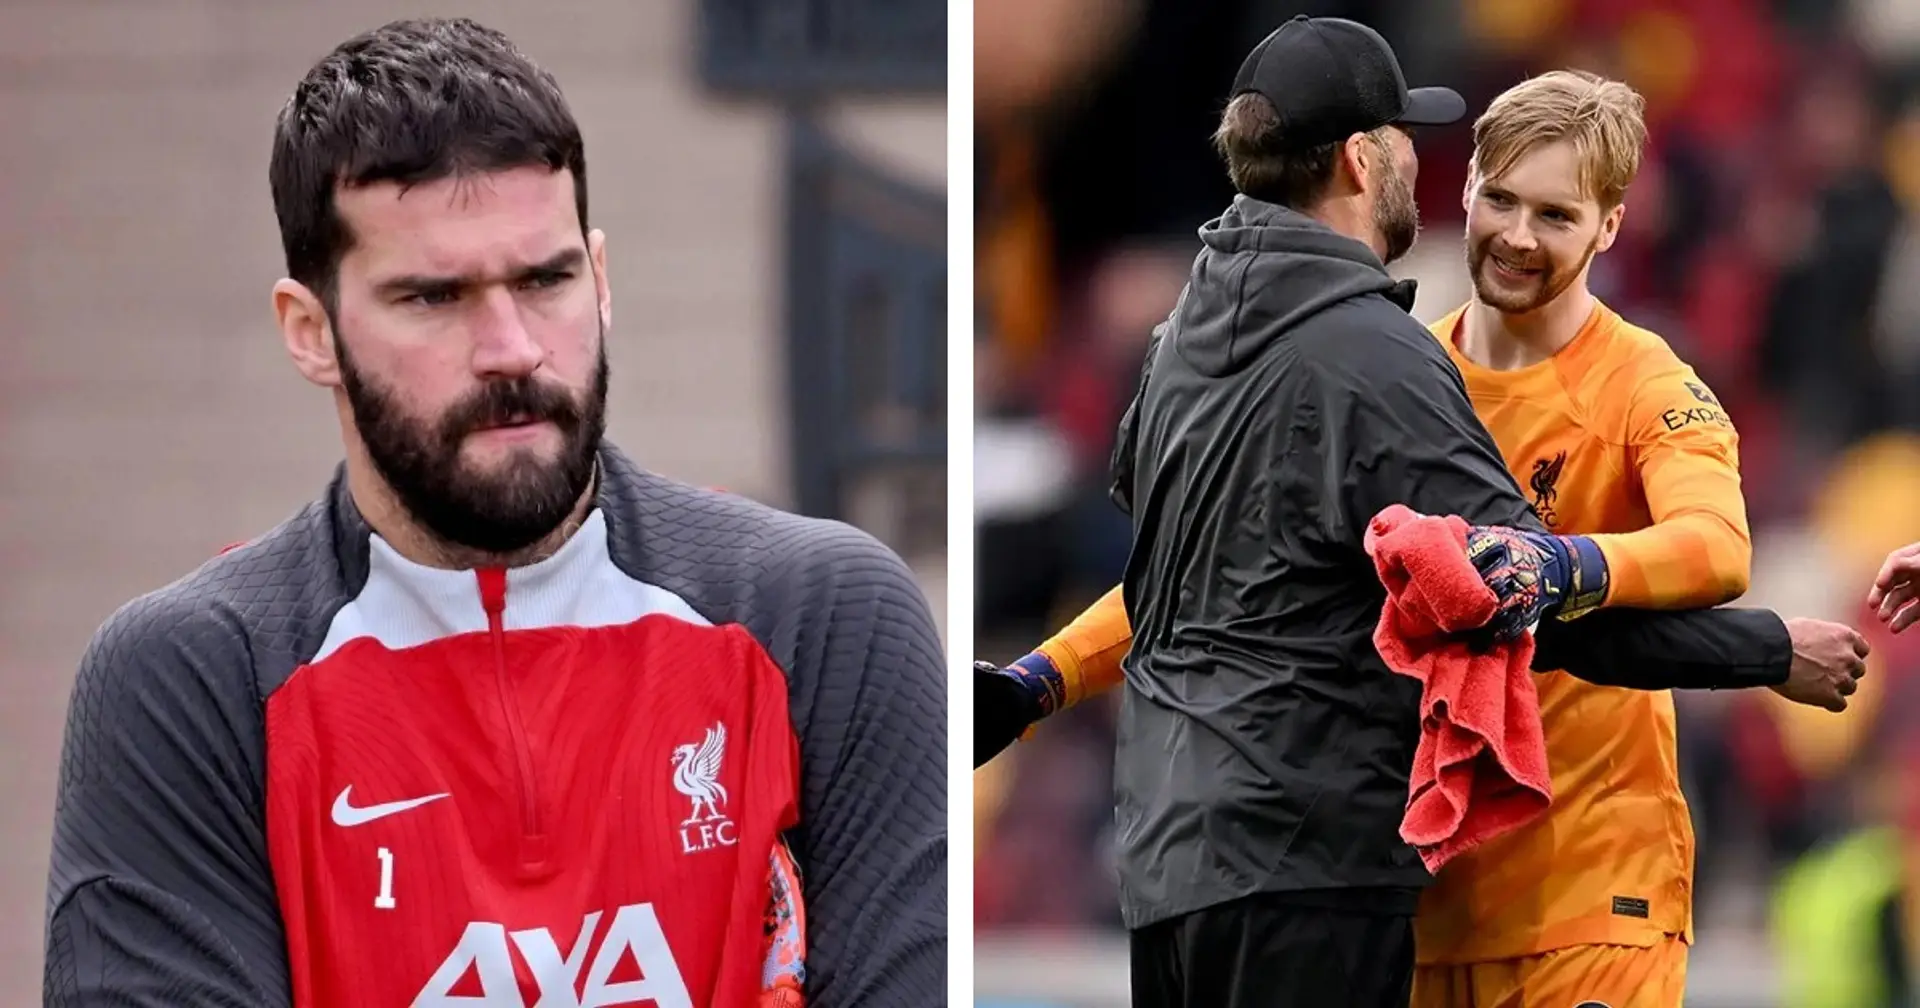 'It was not in my plans at all': Klopp opens up on goalkeeping selection after Alisson injury